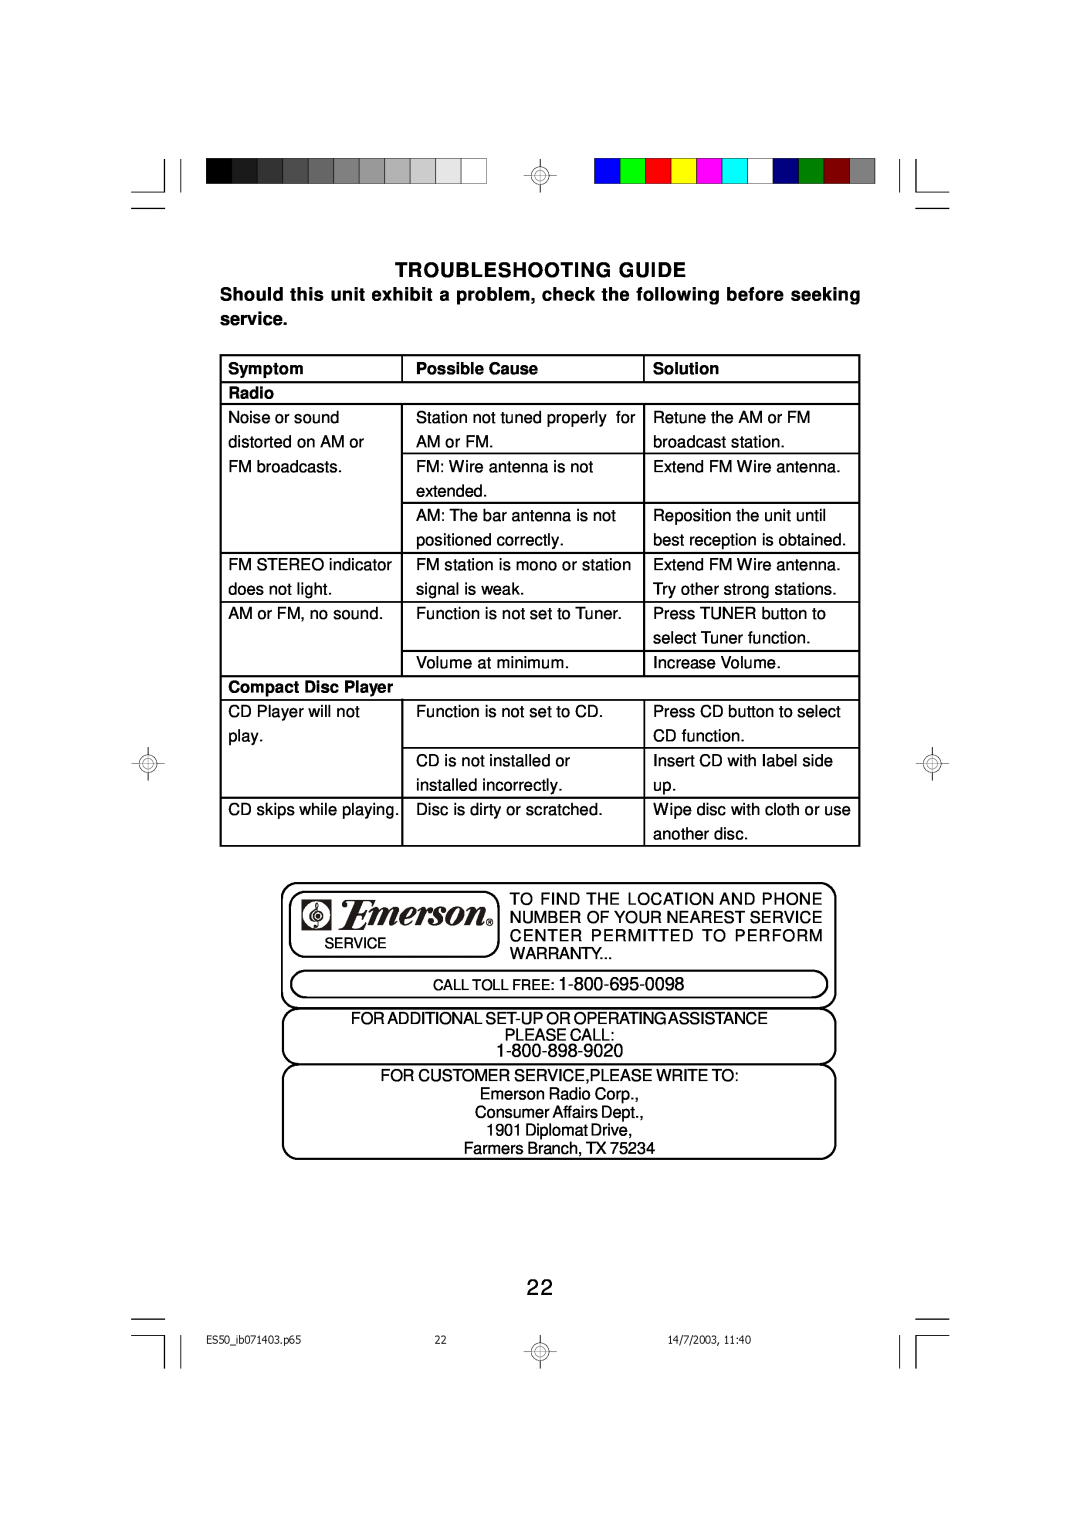 Emerson ES50 owner manual Troubleshooting Guide, Symptom, Possible Cause, Solution, Radio, Compact Disc Player 